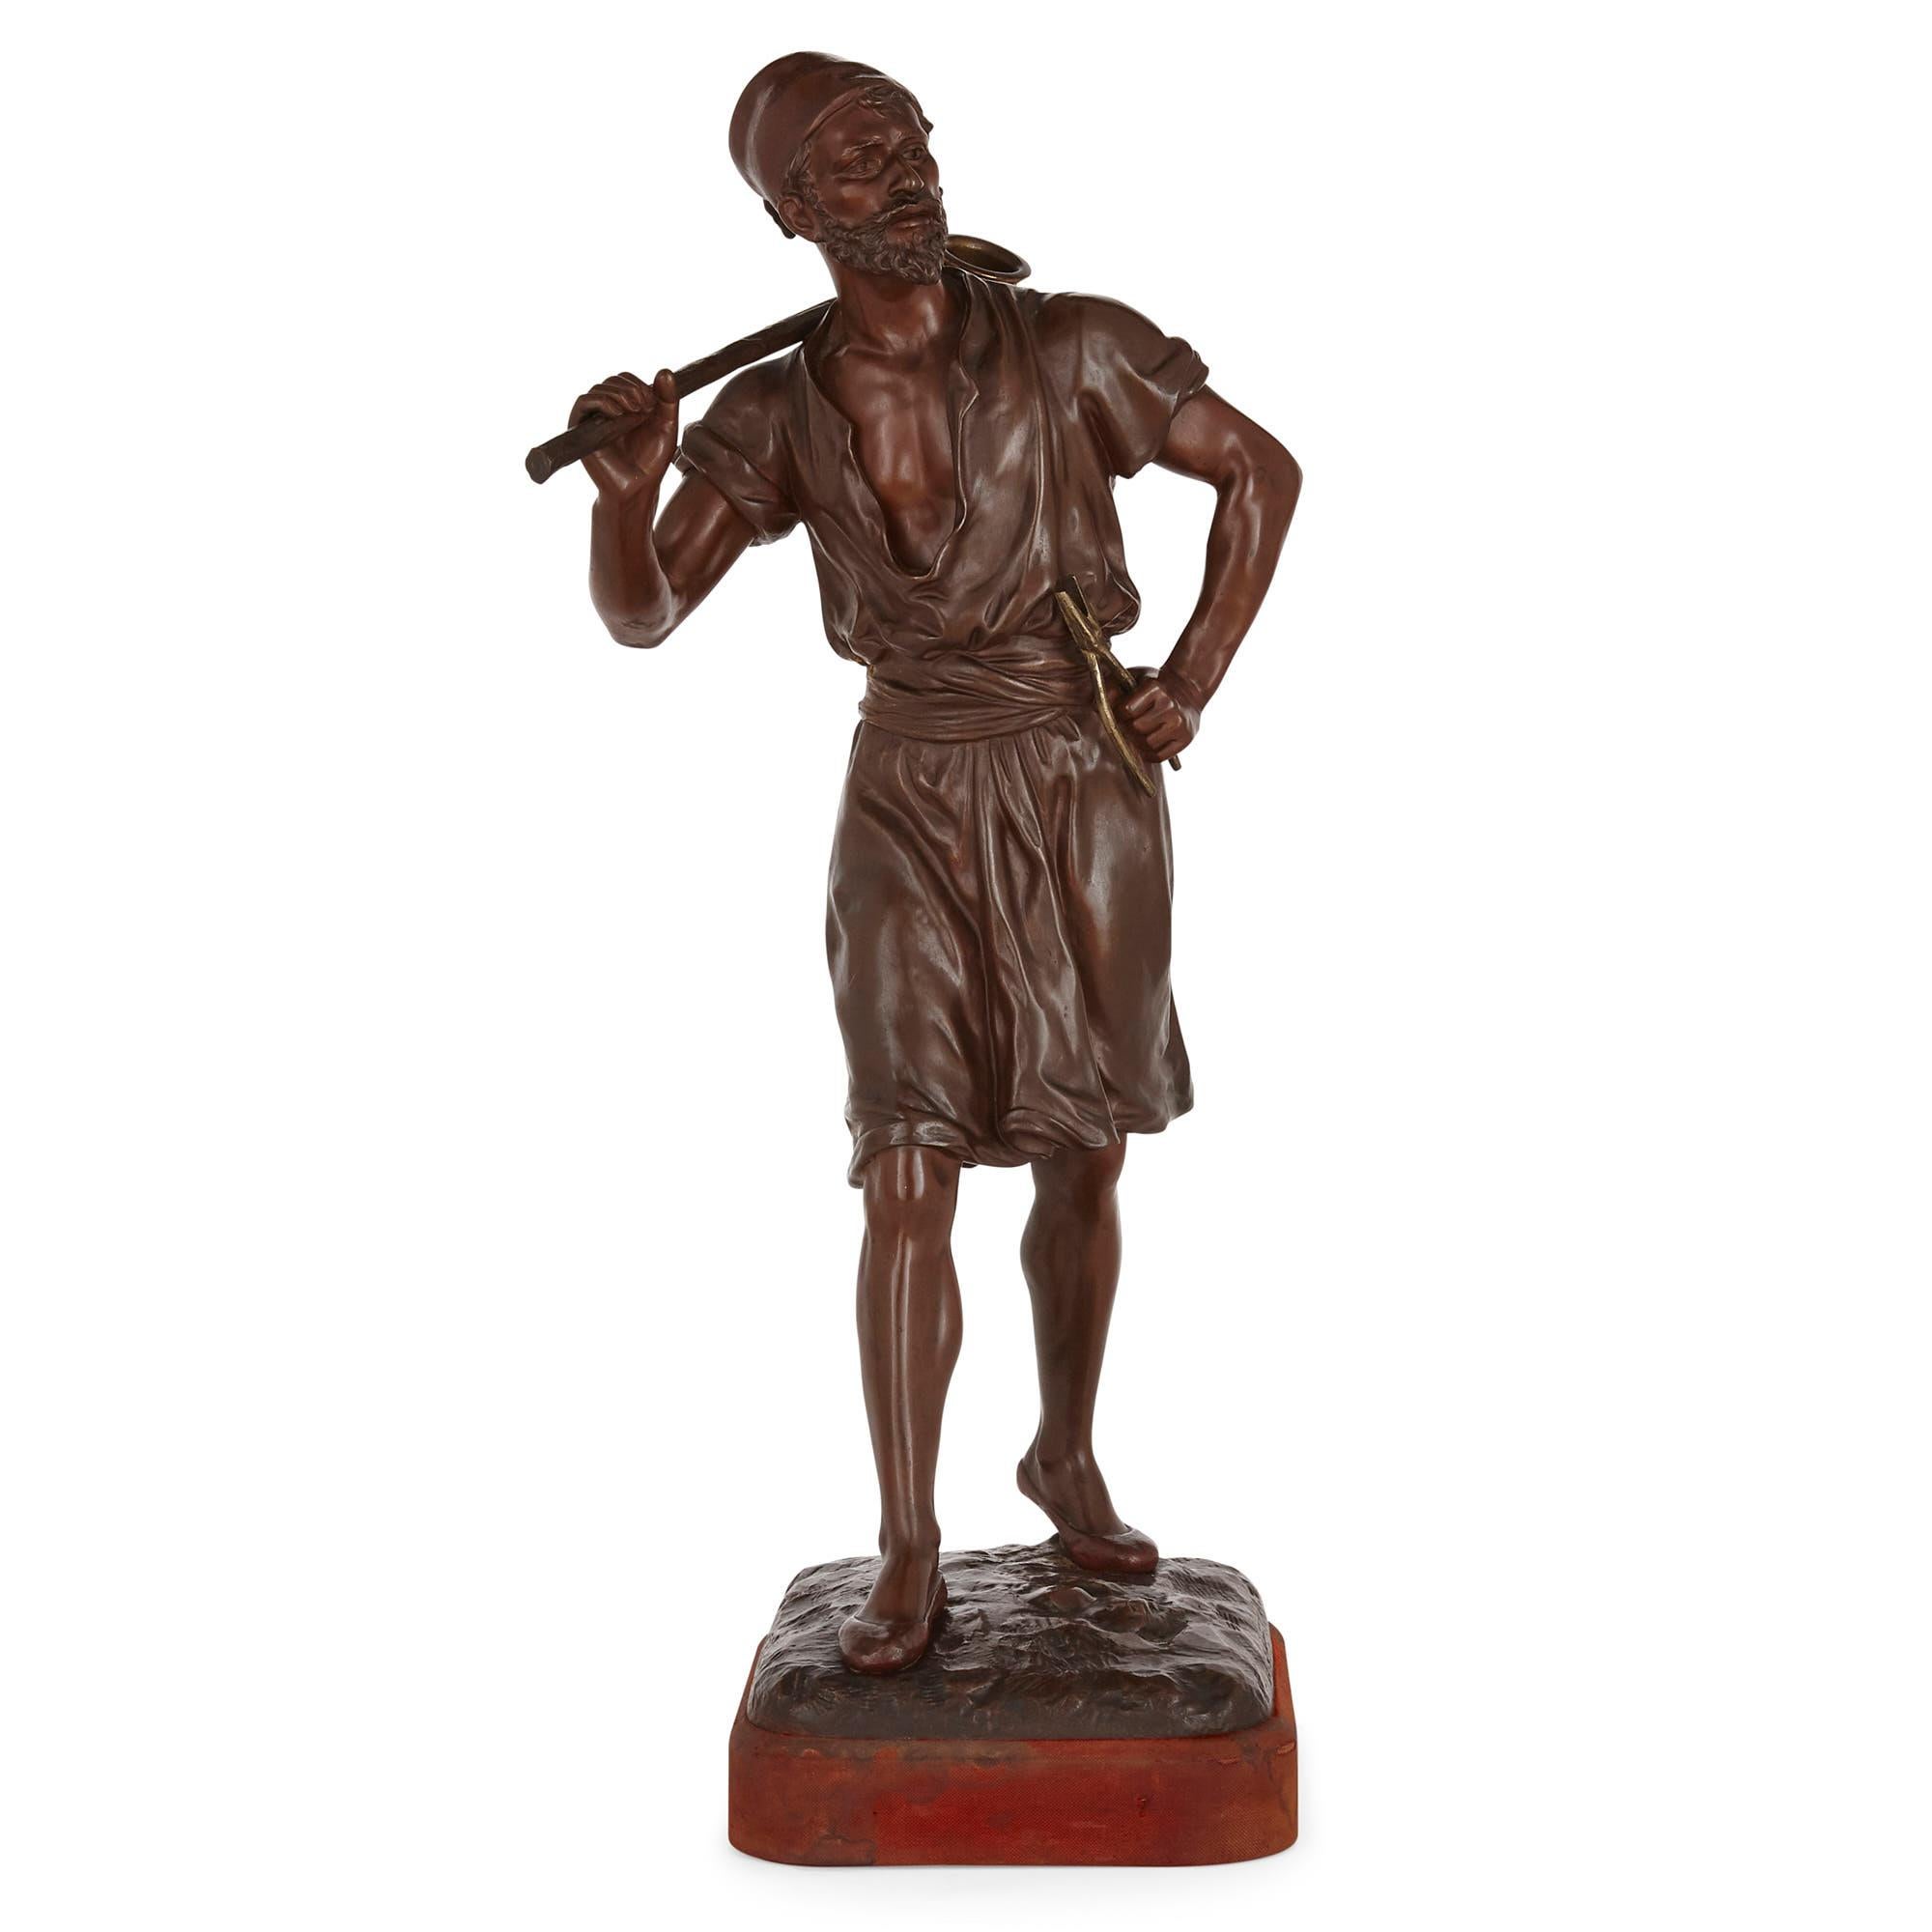 This large bronze figure was sculpted by the French artist Marcel Debut and cast by the Oudin foundry in Marseille (‘Debut’ and ‘Oudin’ are signed to the base).

The figure represents a walking male figure who holds a bindle over his shoulder,